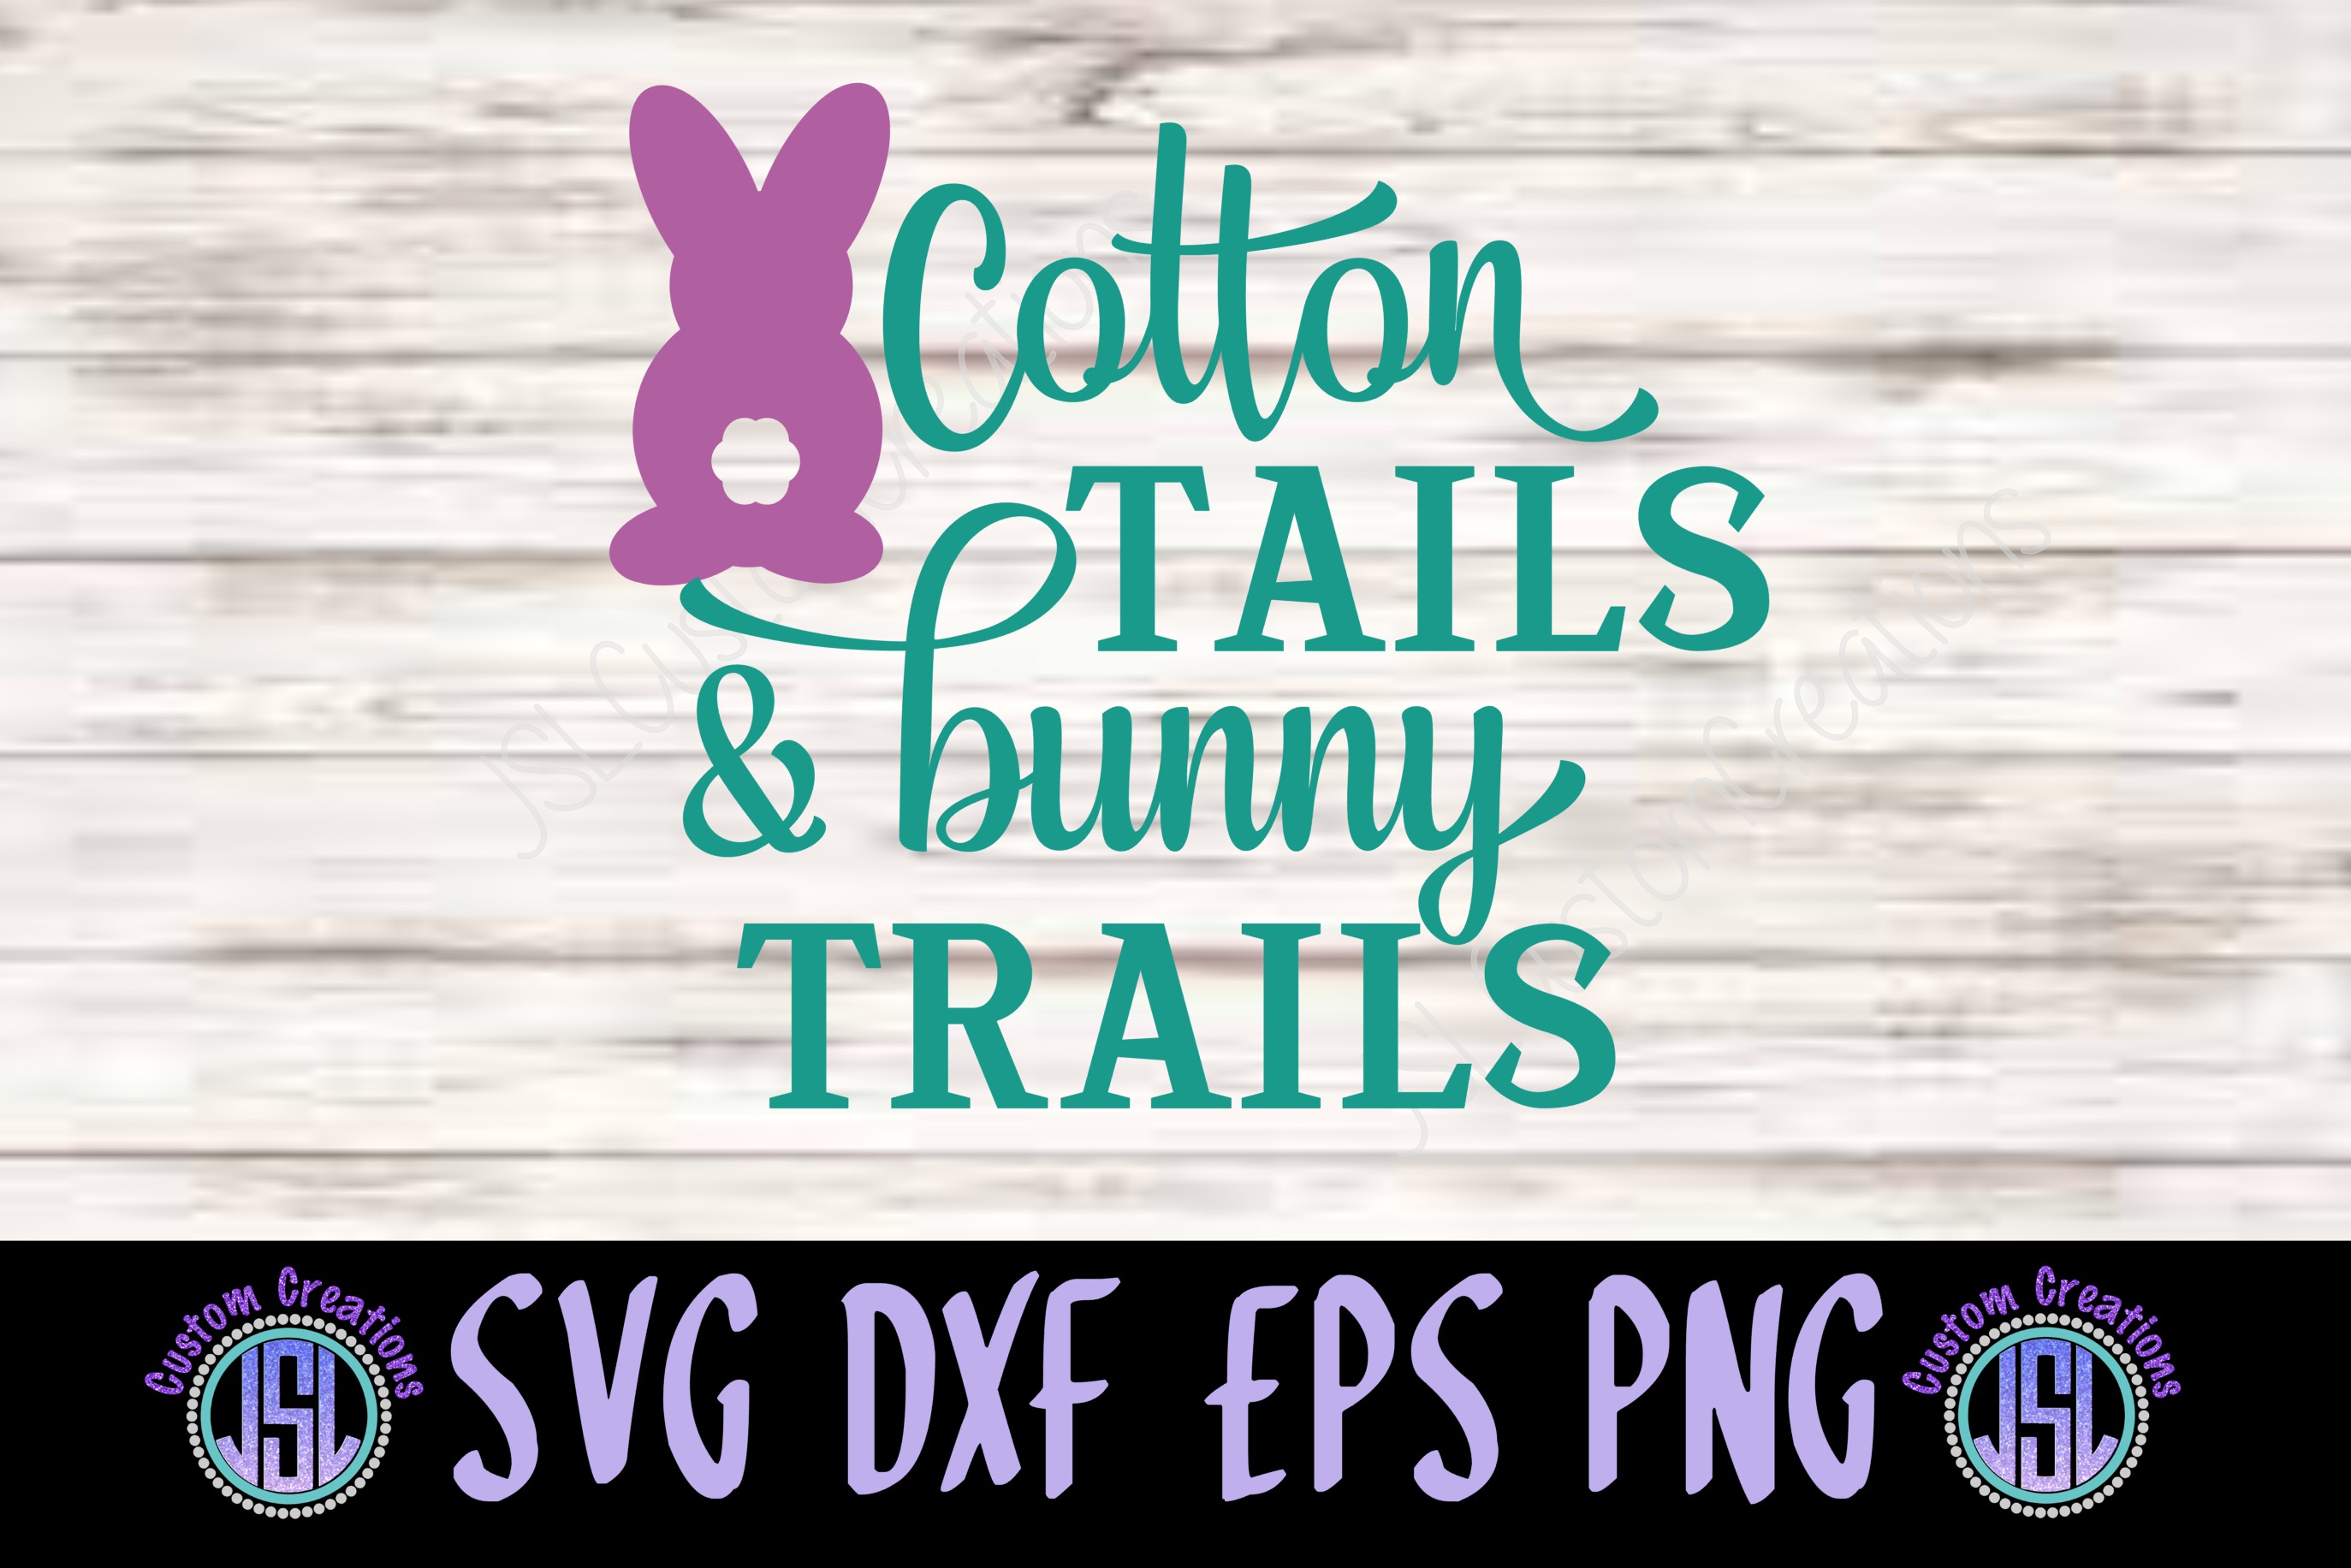 Download Cotton Tails & Bunny Trails | SVG DXF EPS PNG Cut Files ...